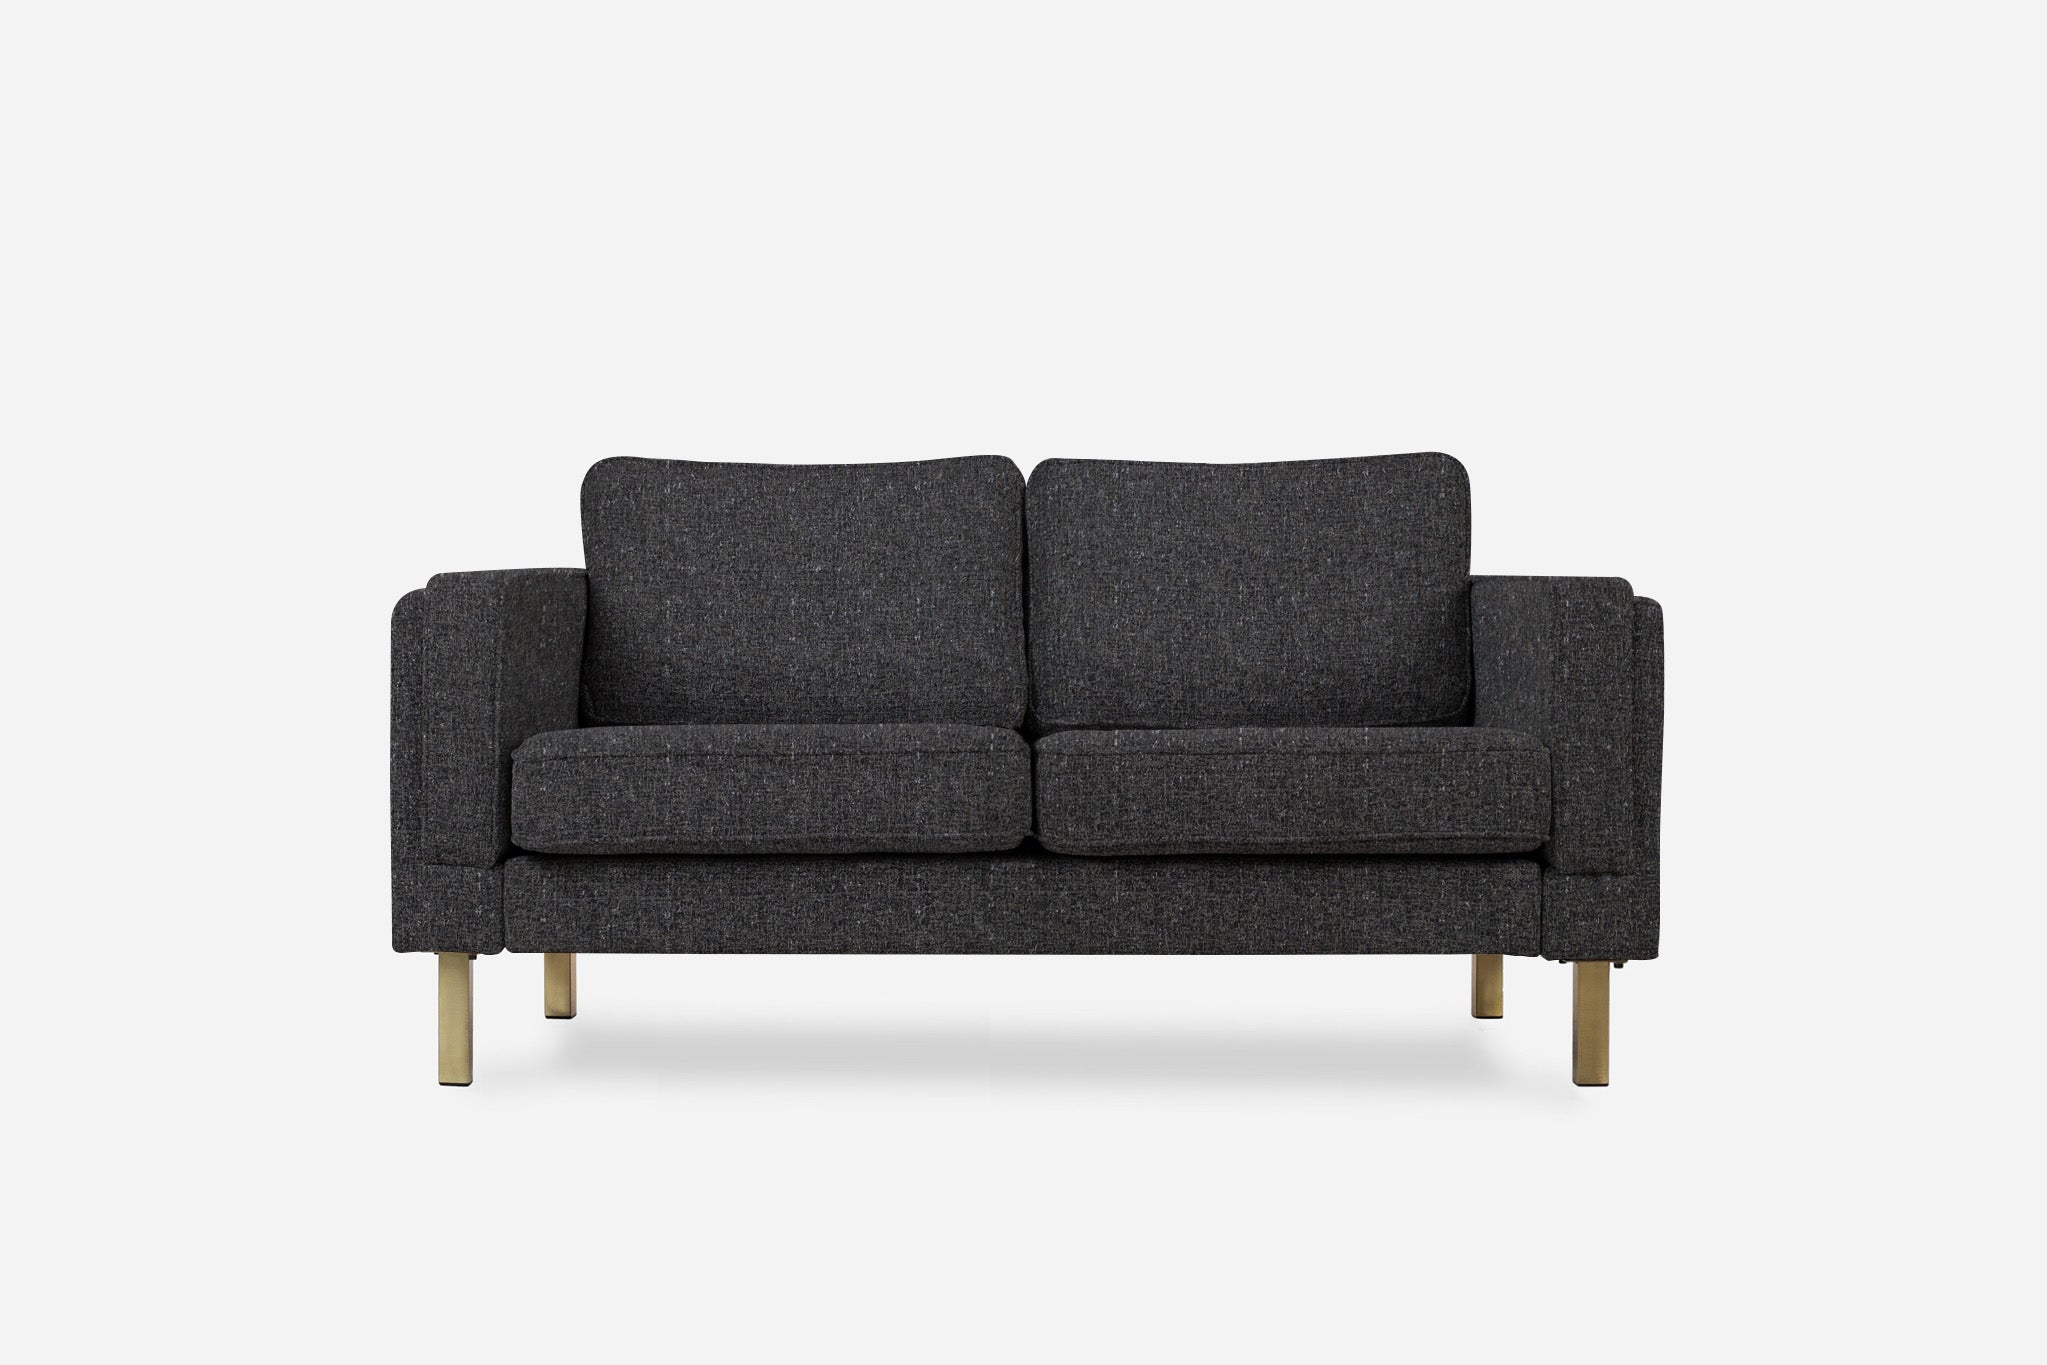 albany loveseat shown in charcoal with gold legs